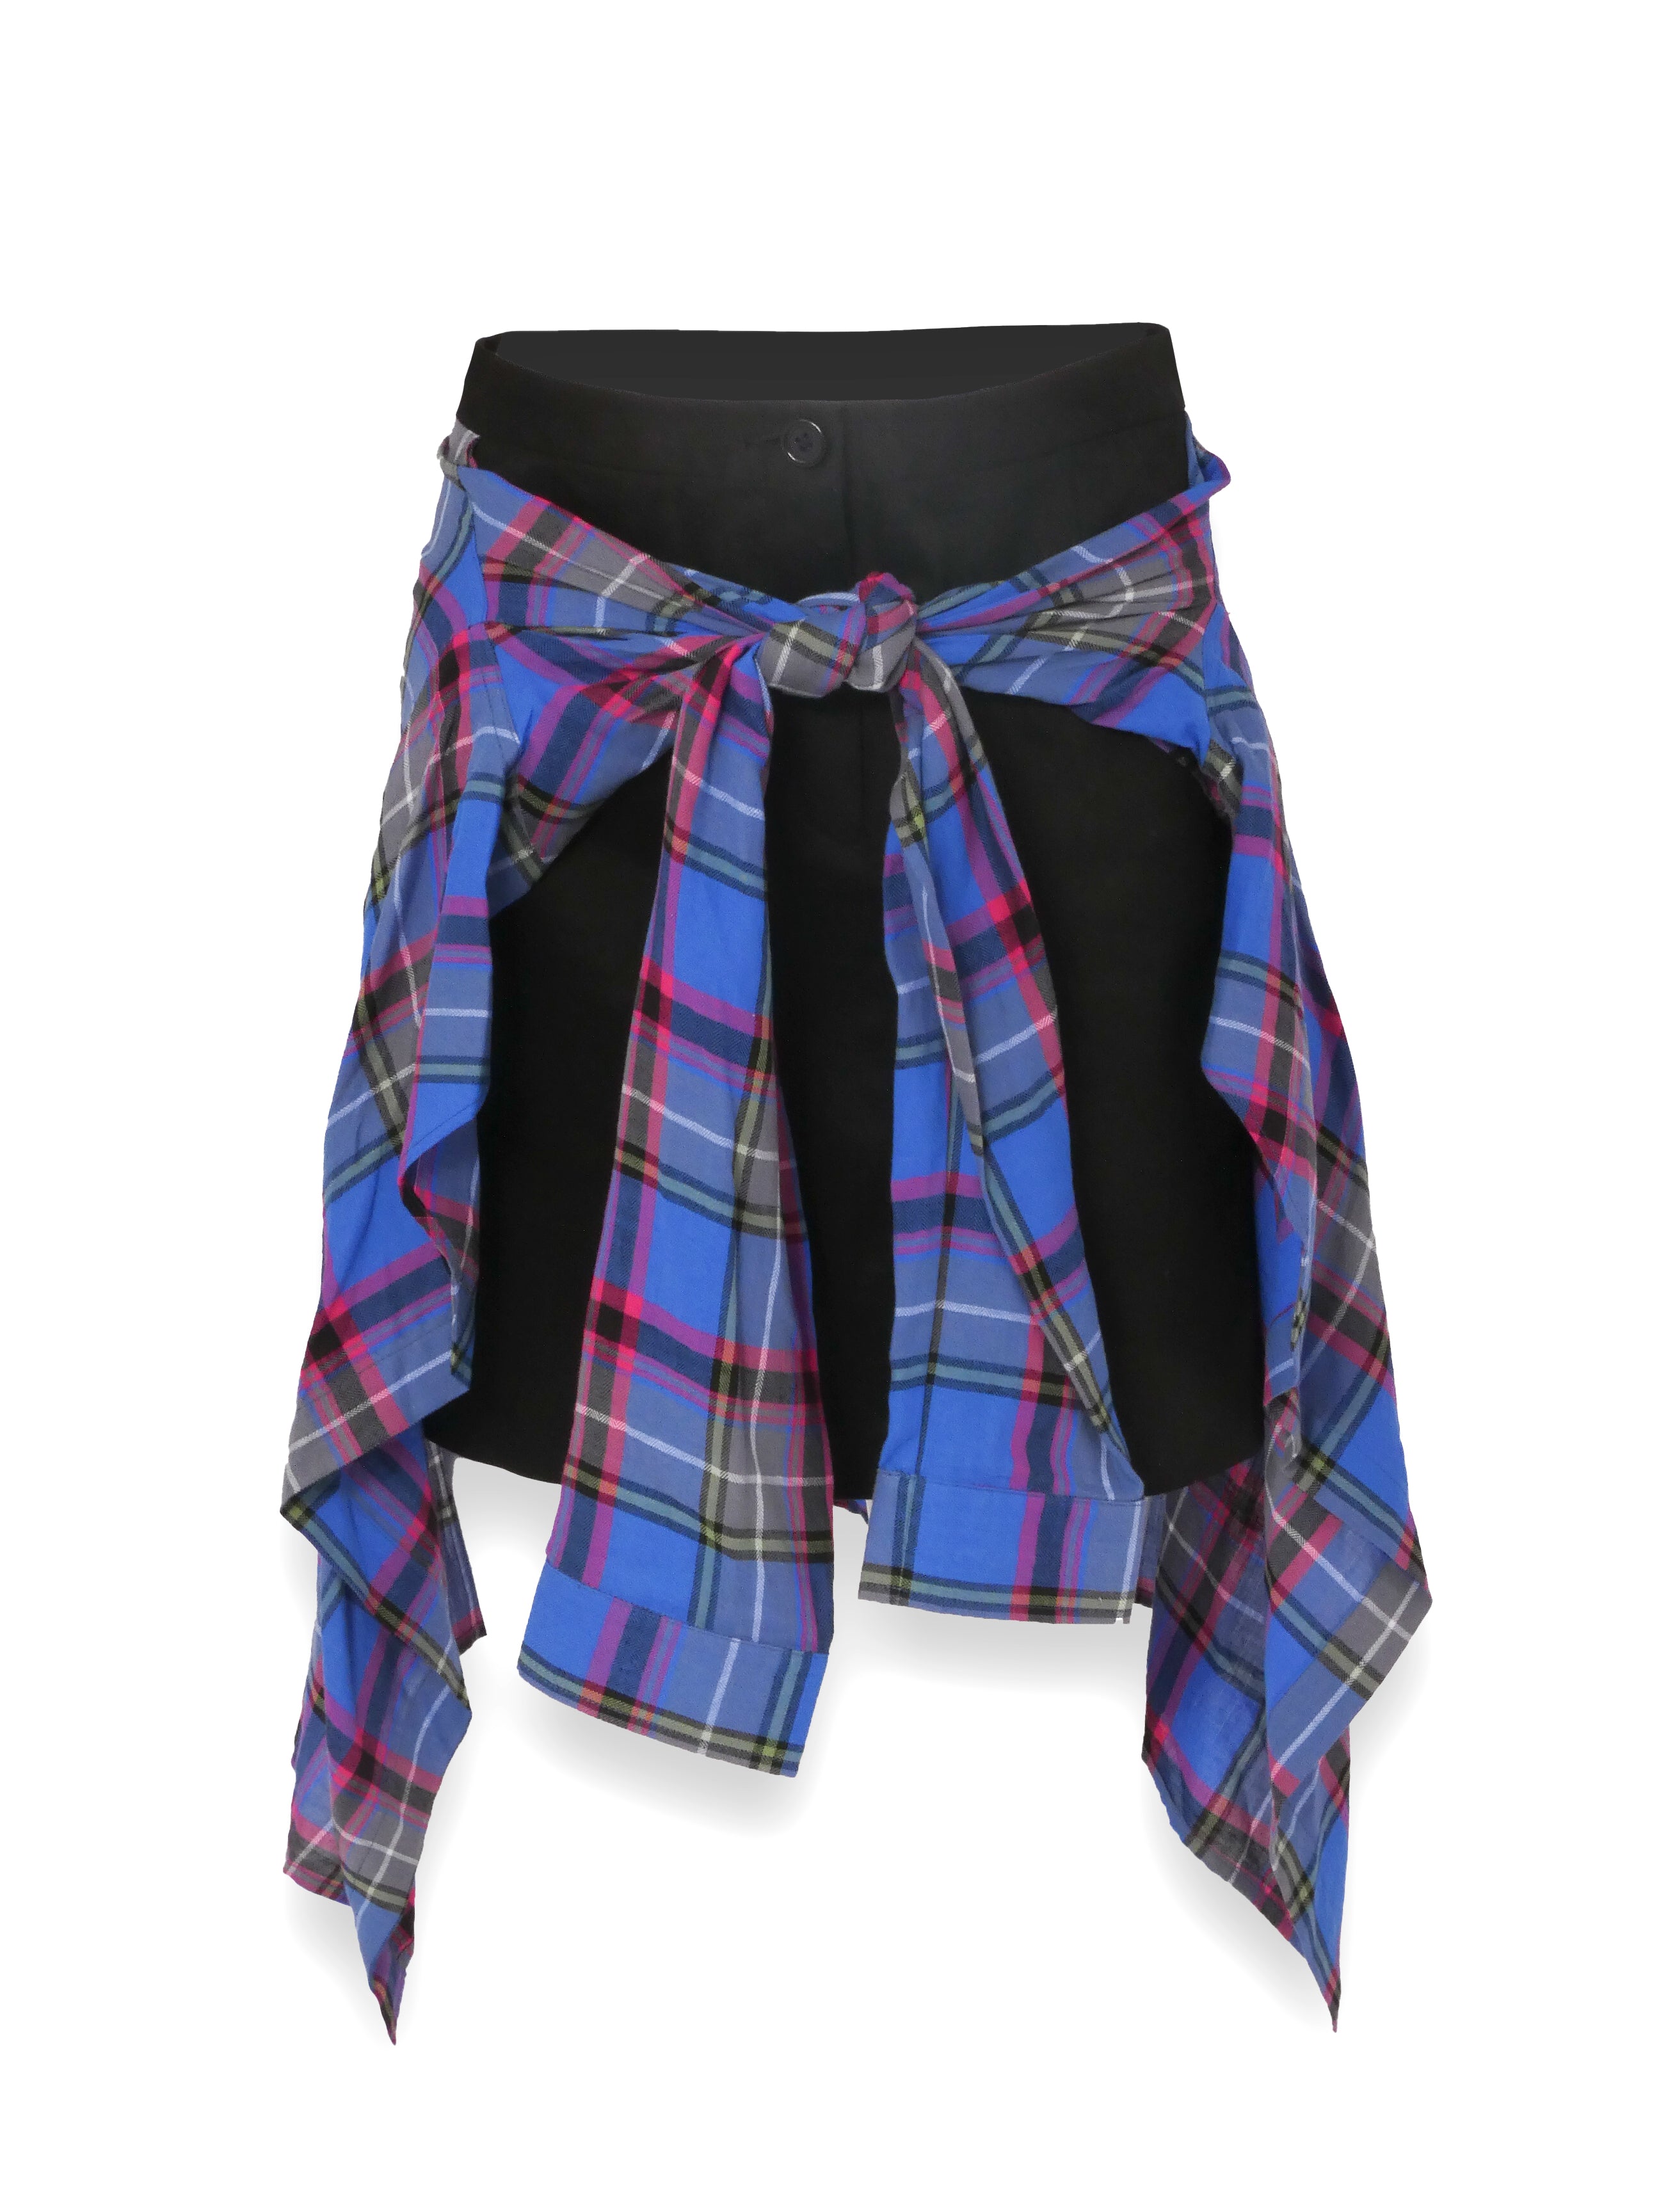 Black Skirt With Colourful Checkered Tie Up Detail